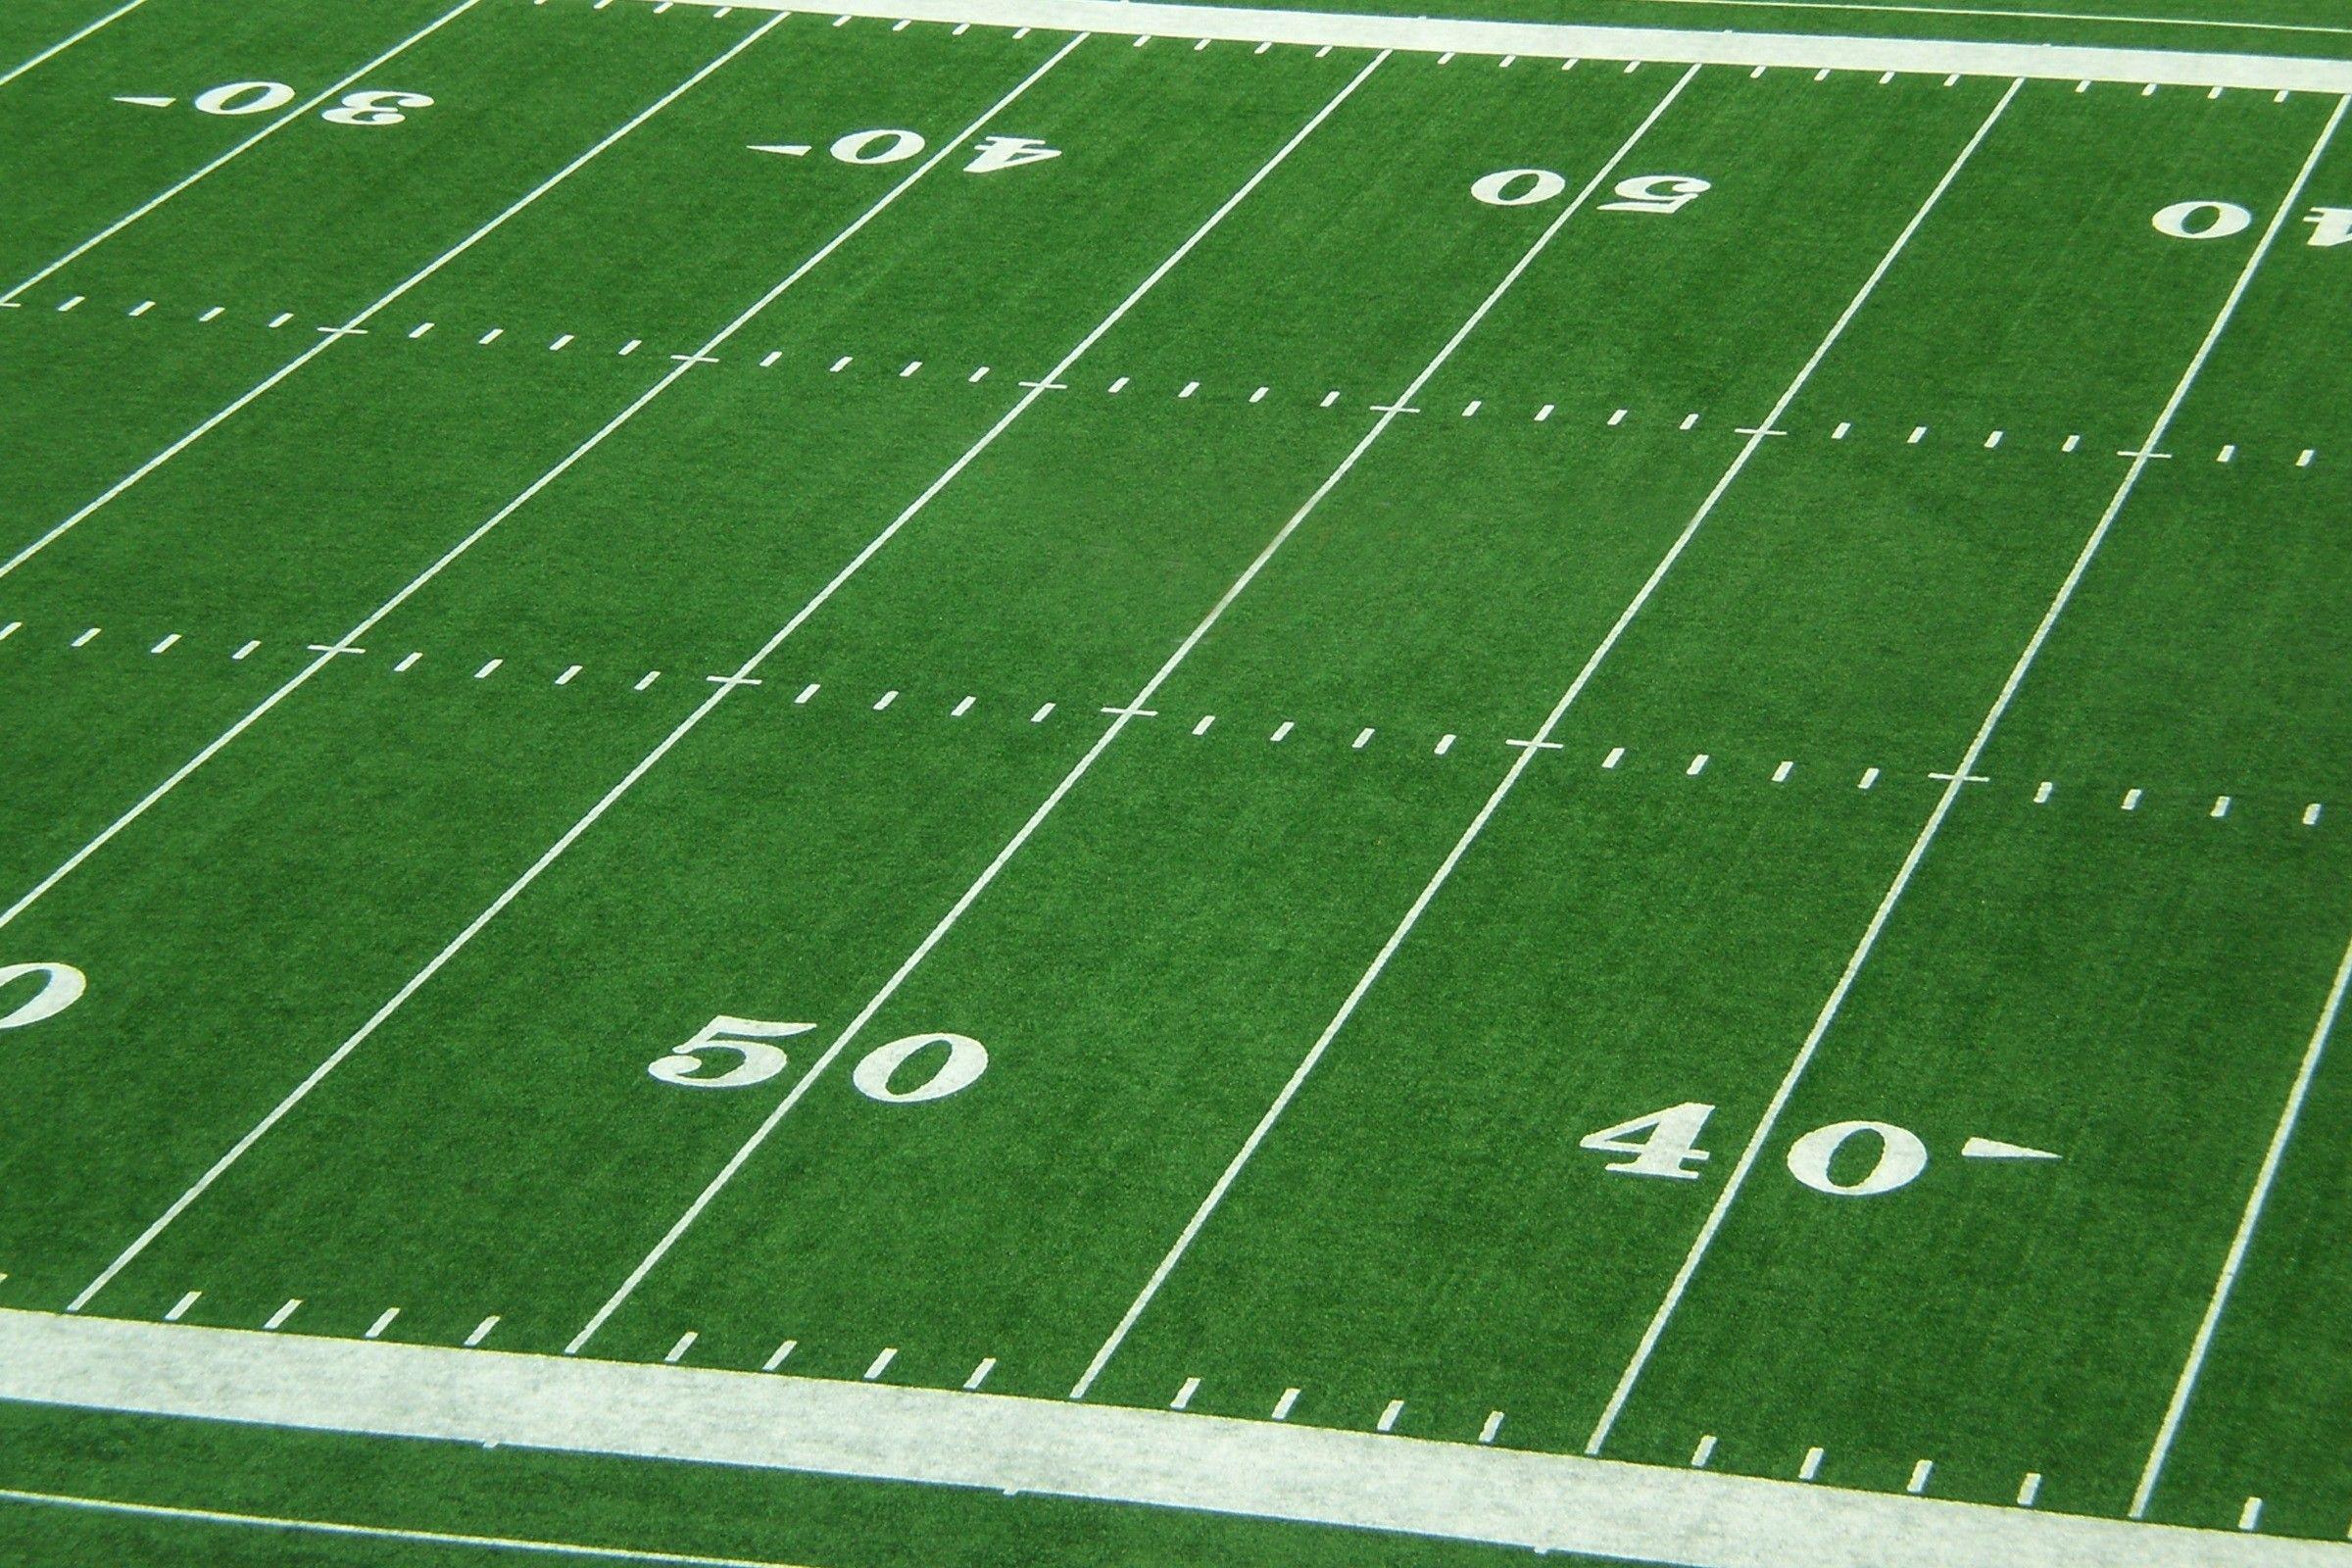 Football Field backgroundDownload free full HD background